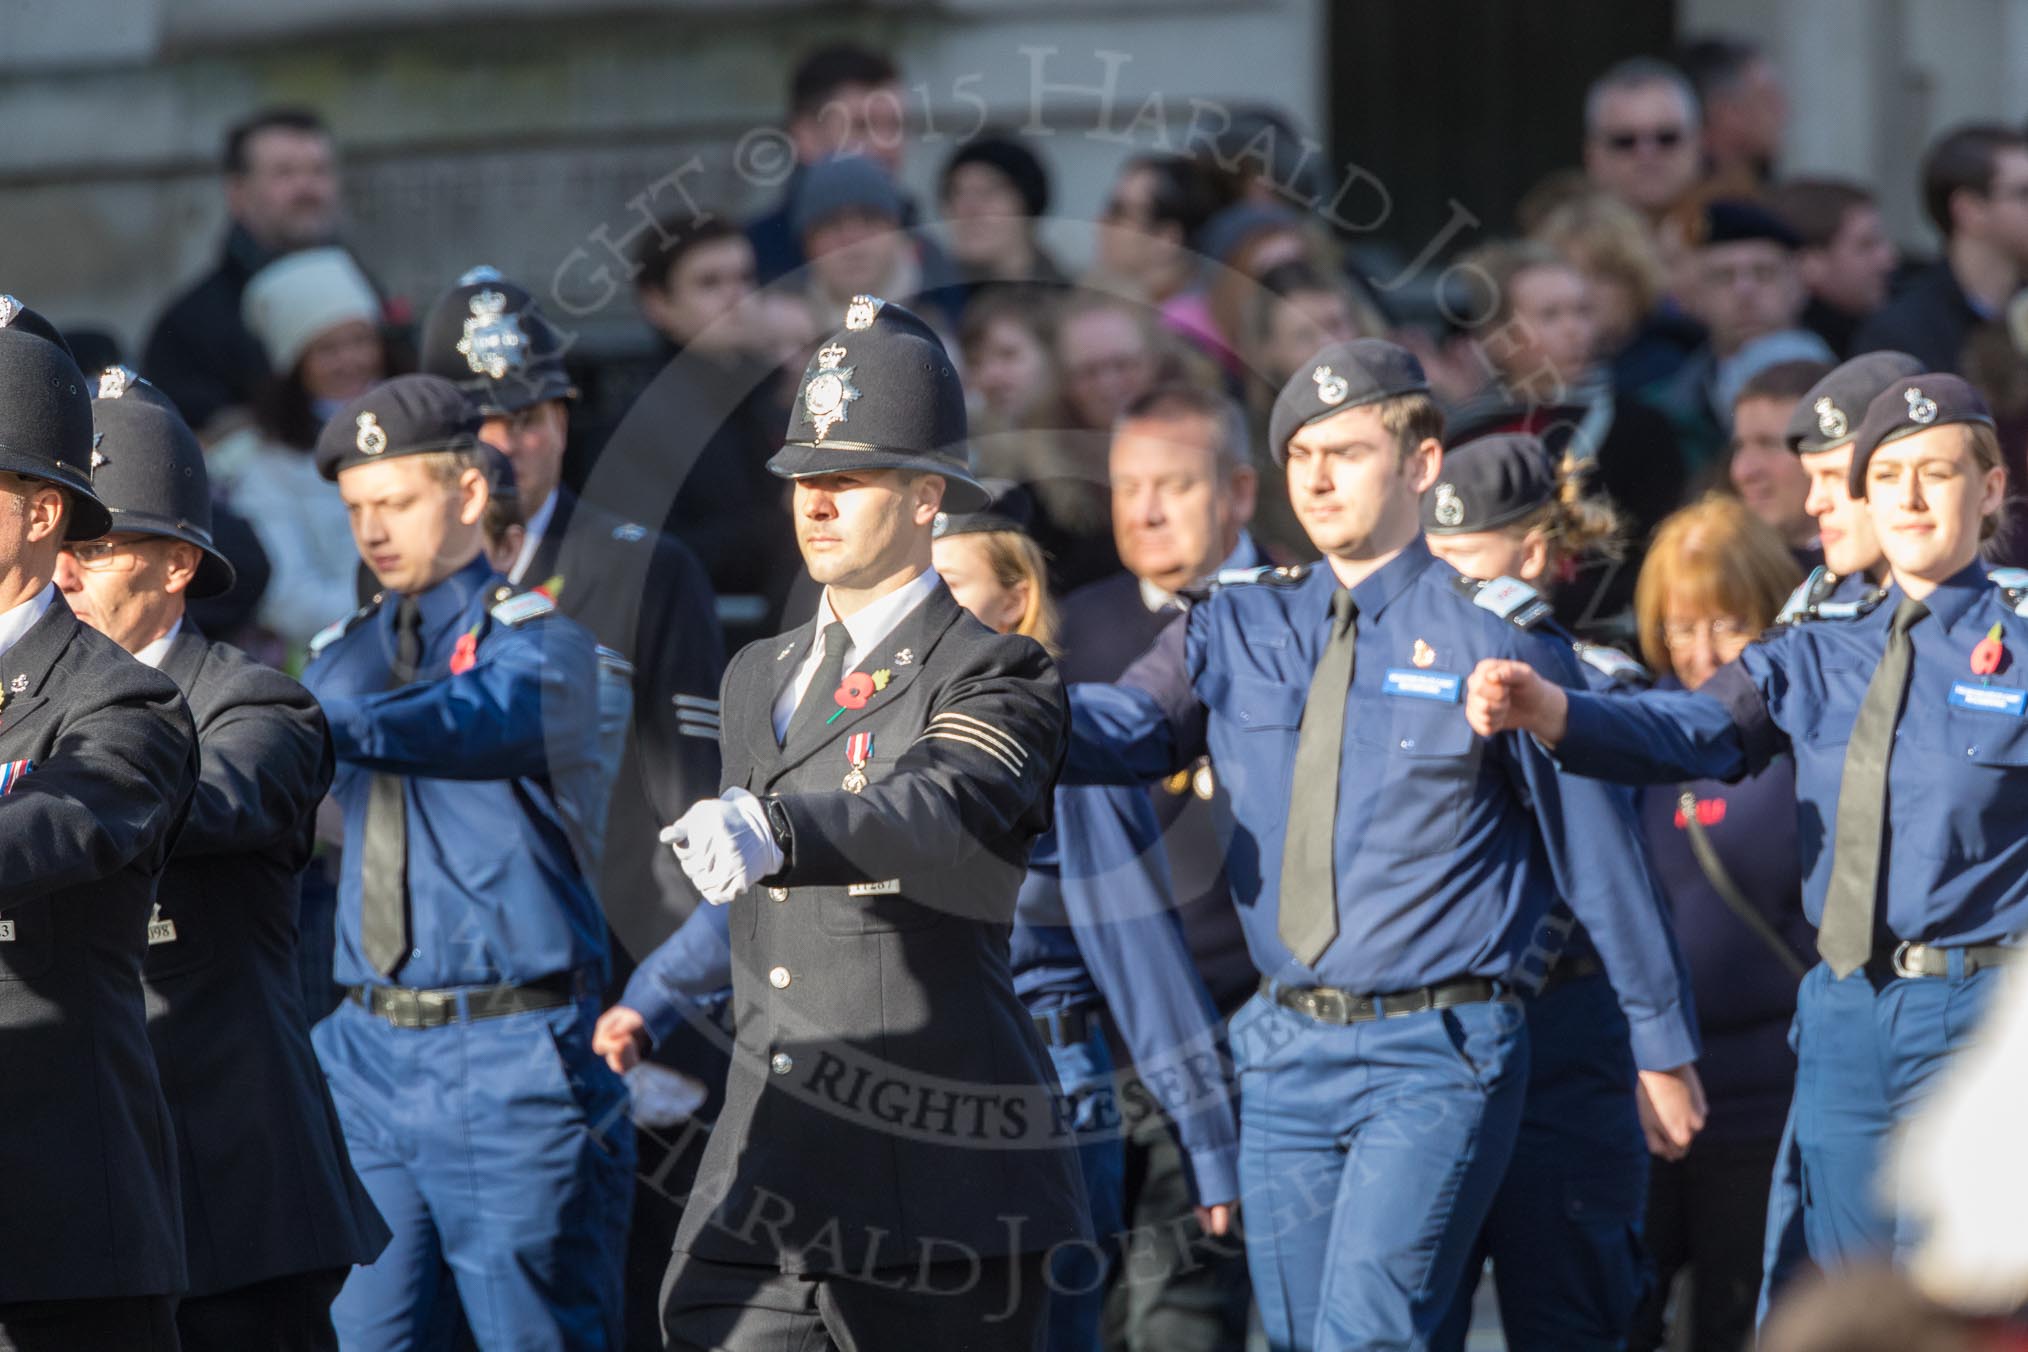 March Past, Remembrance Sunday at the Cenotaph 2016: M40 Richmond Volunteer Police Cadets.
Cenotaph, Whitehall, London SW1,
London,
Greater London,
United Kingdom,
on 13 November 2016 at 13:19, image #2940